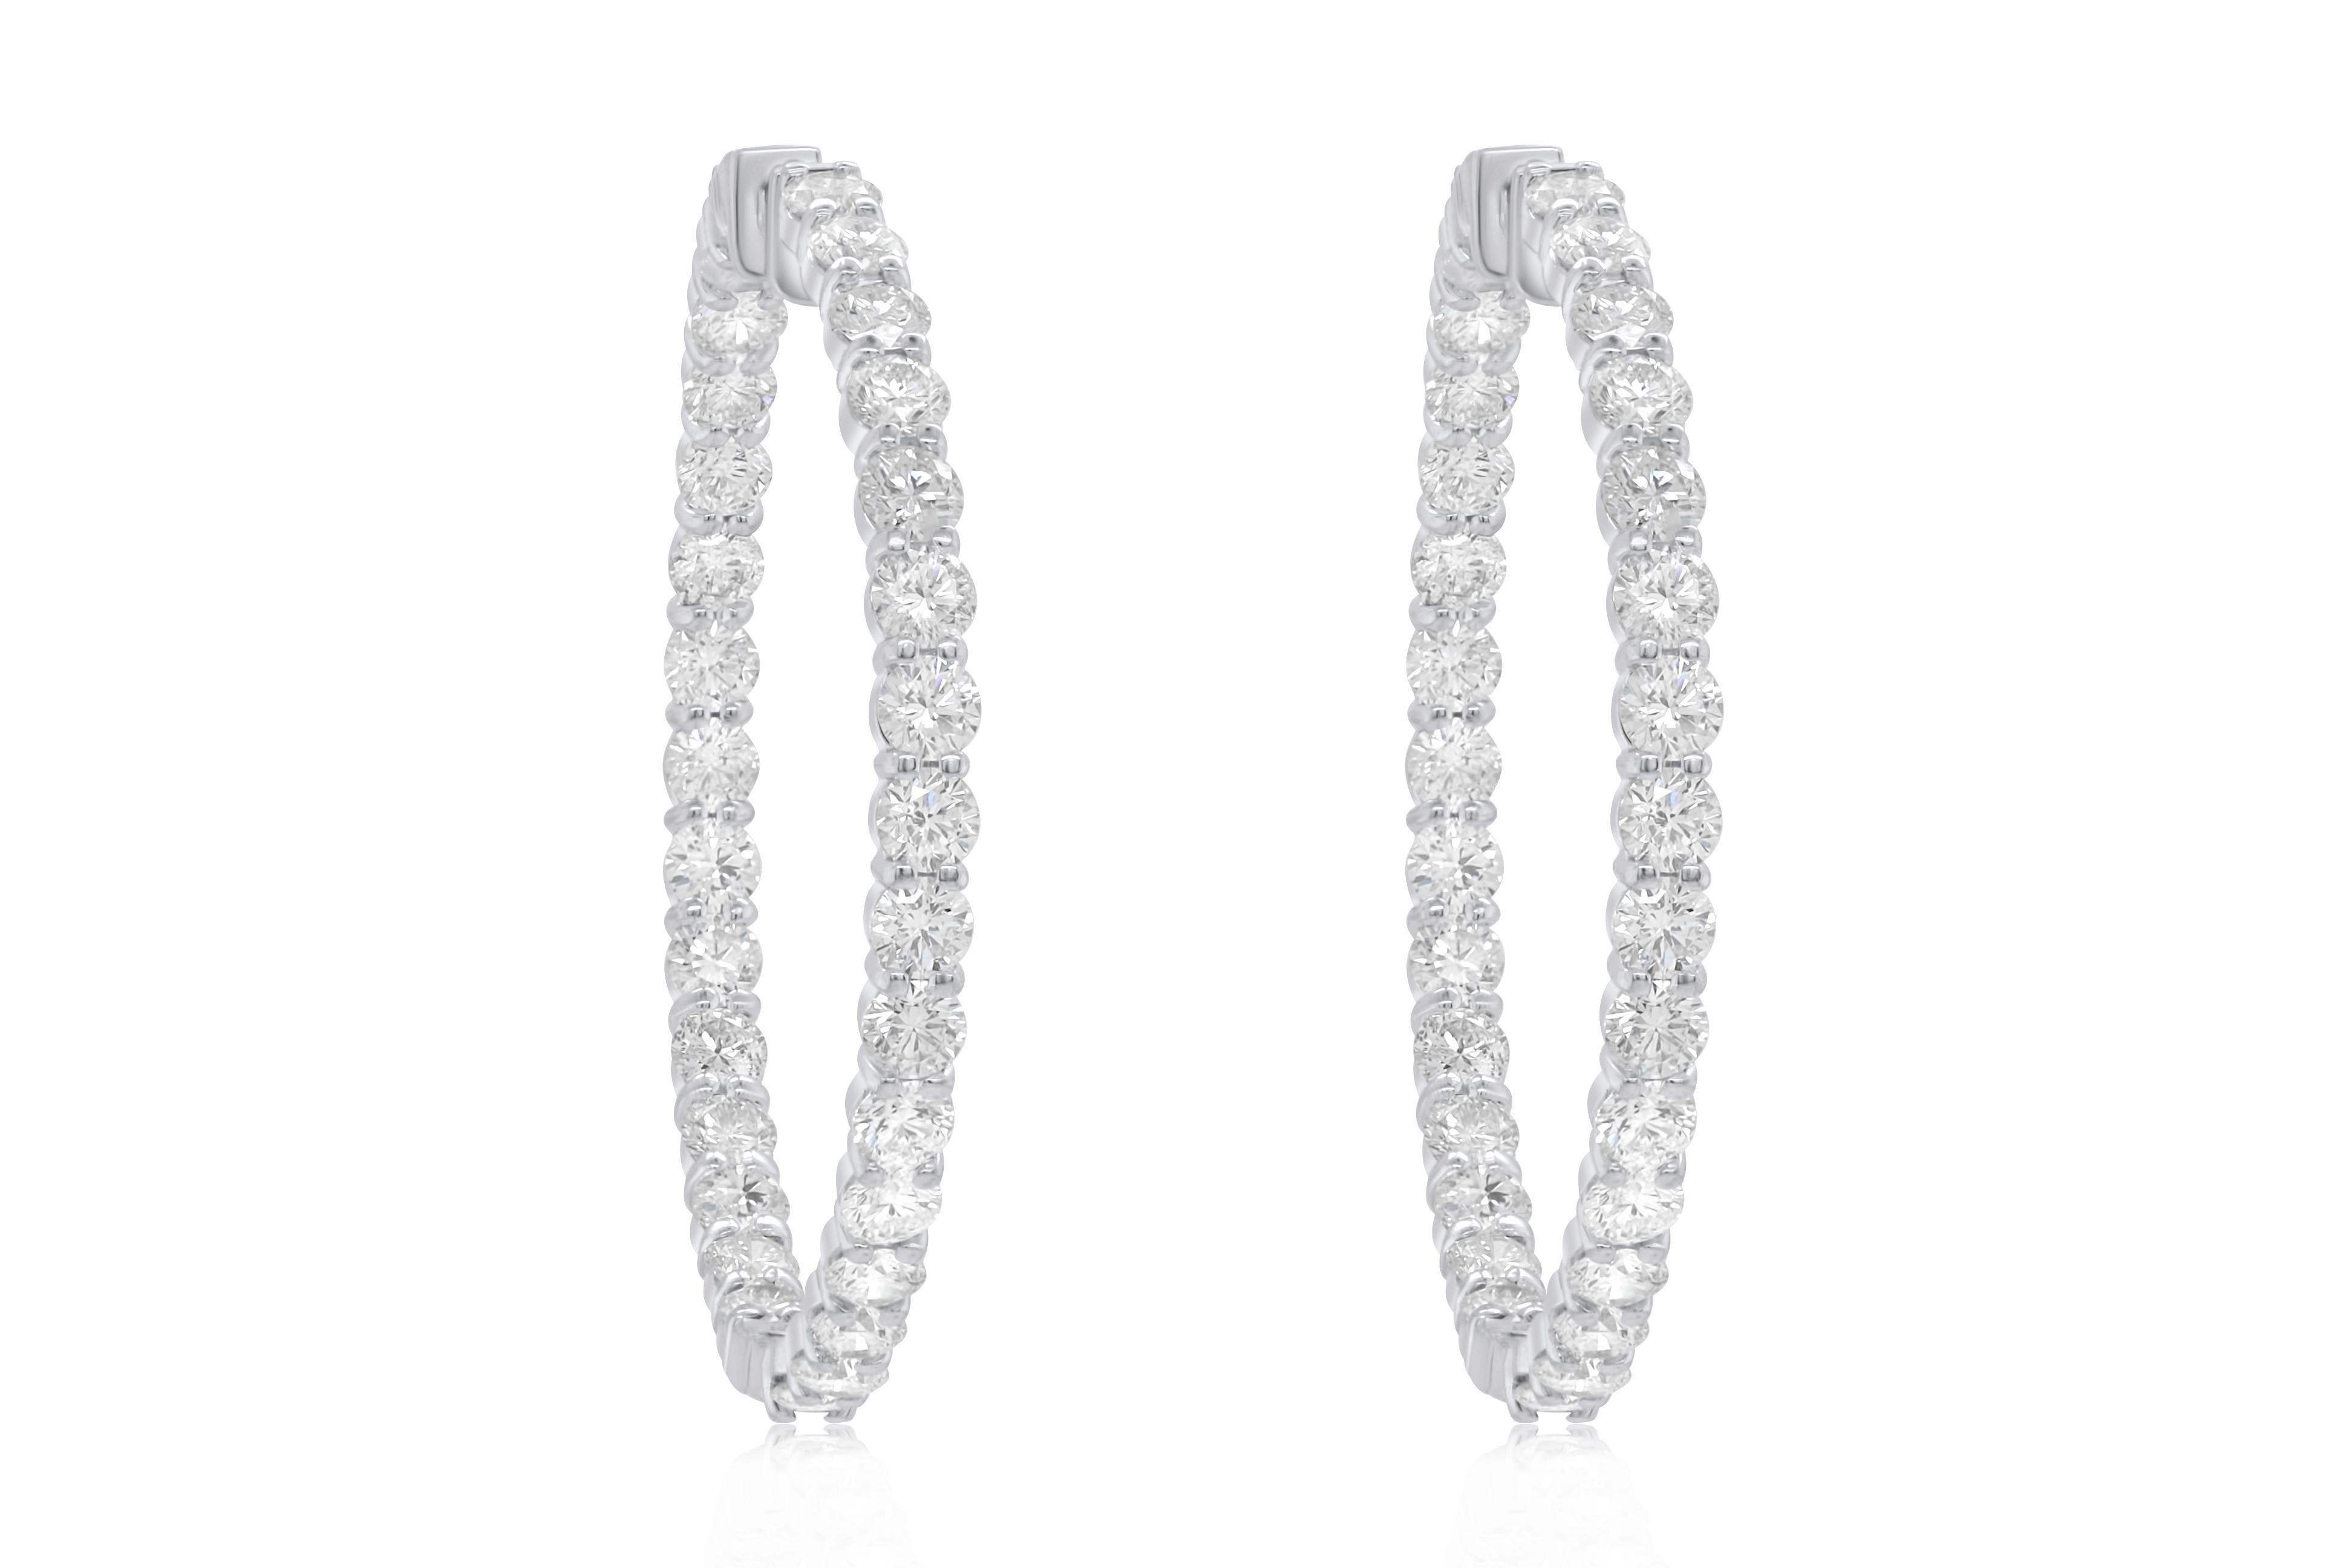 14K White Gold Diamond Earrings featuring 14.75 Carat T.W. of Natural Diamonds 2